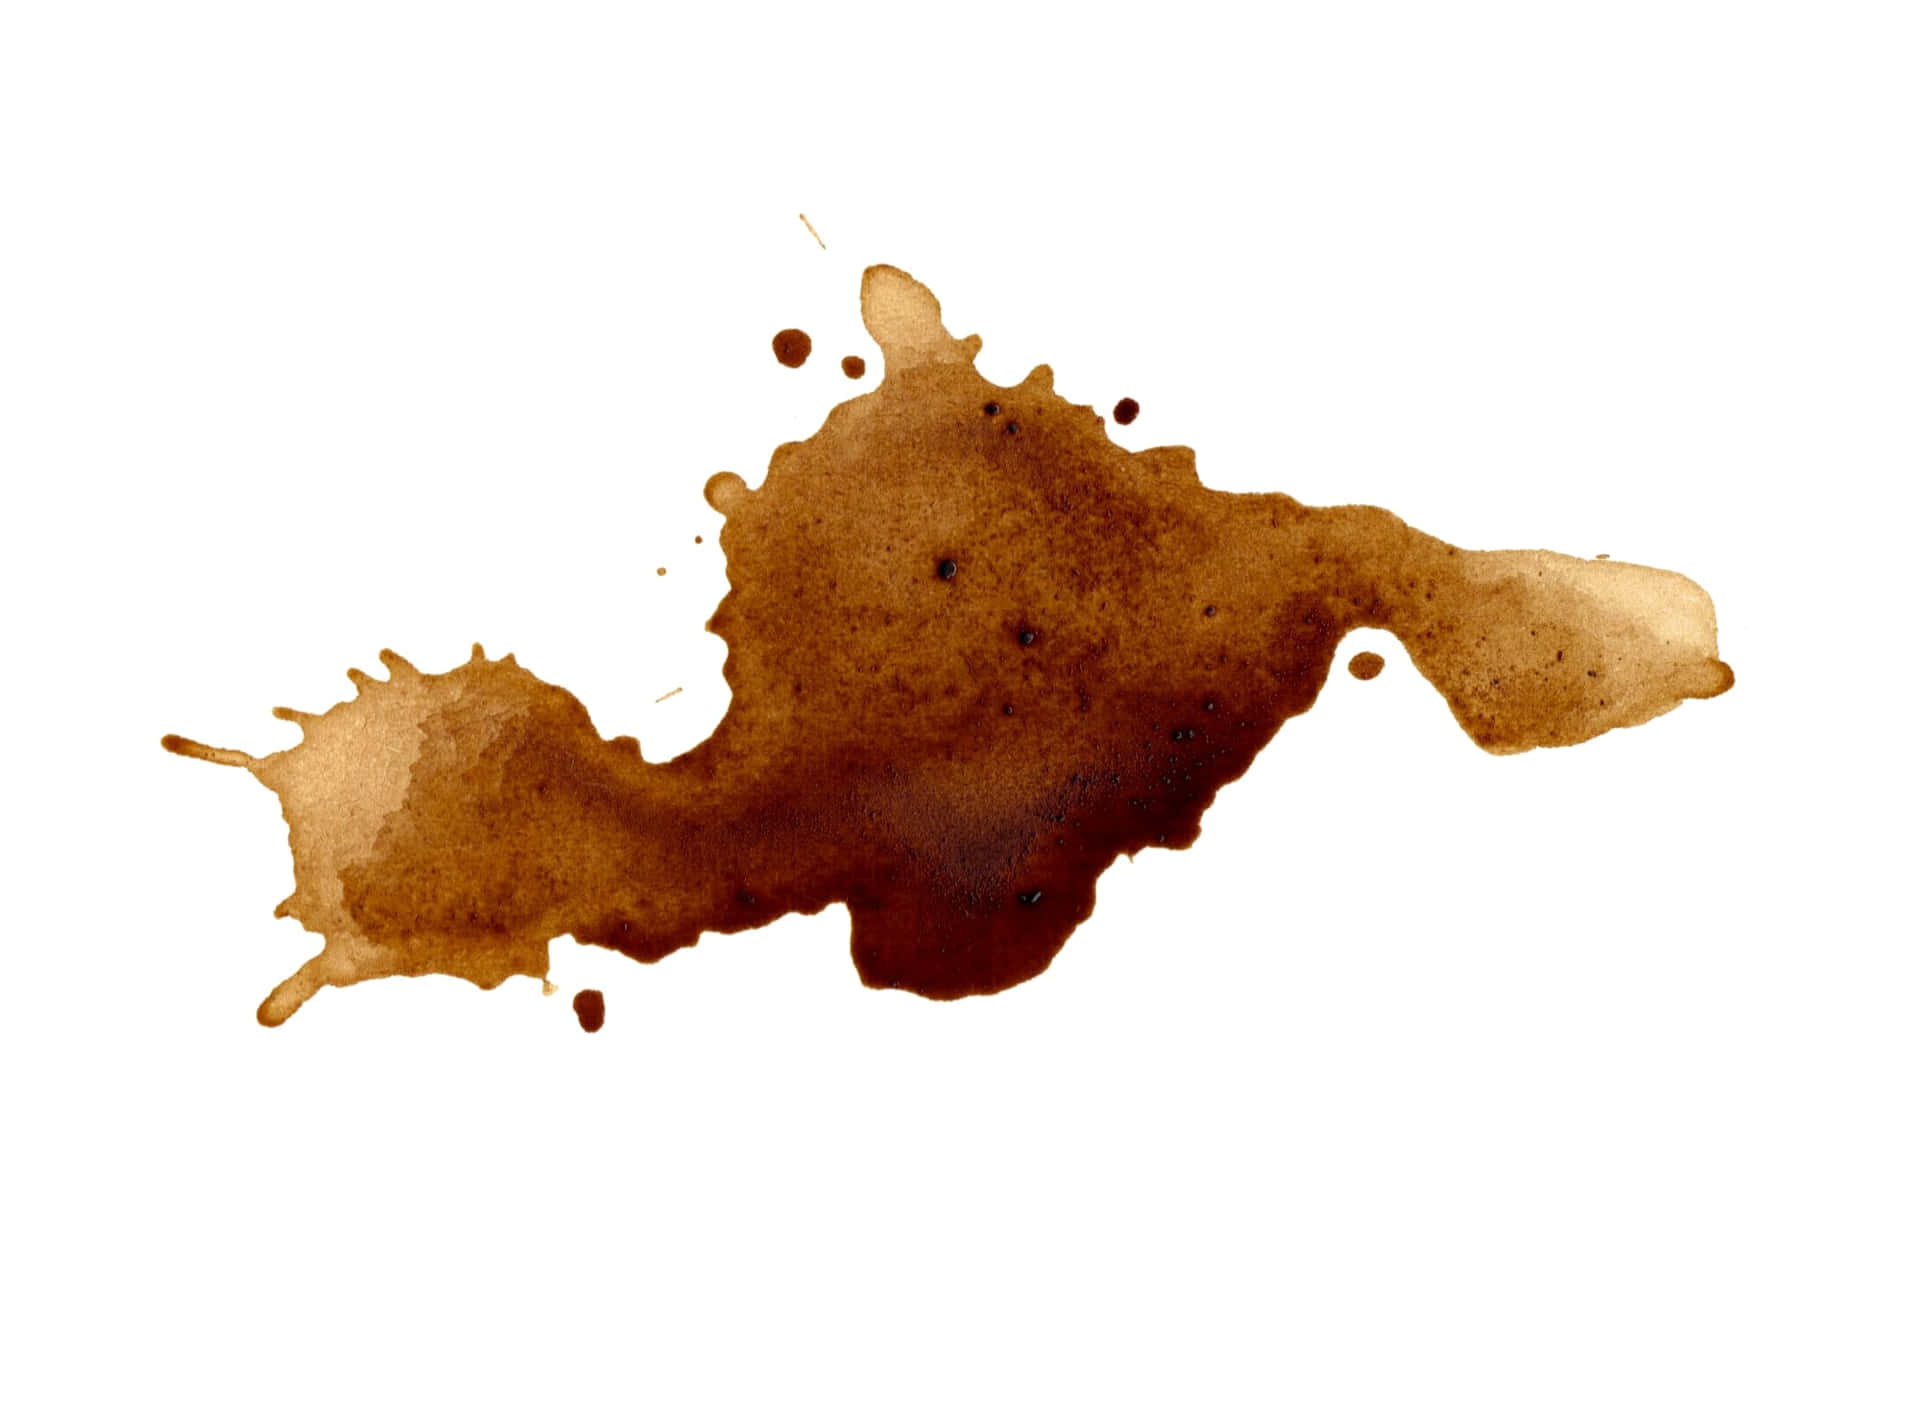 Fortuitous Coffee Ink Mark Wallpaper